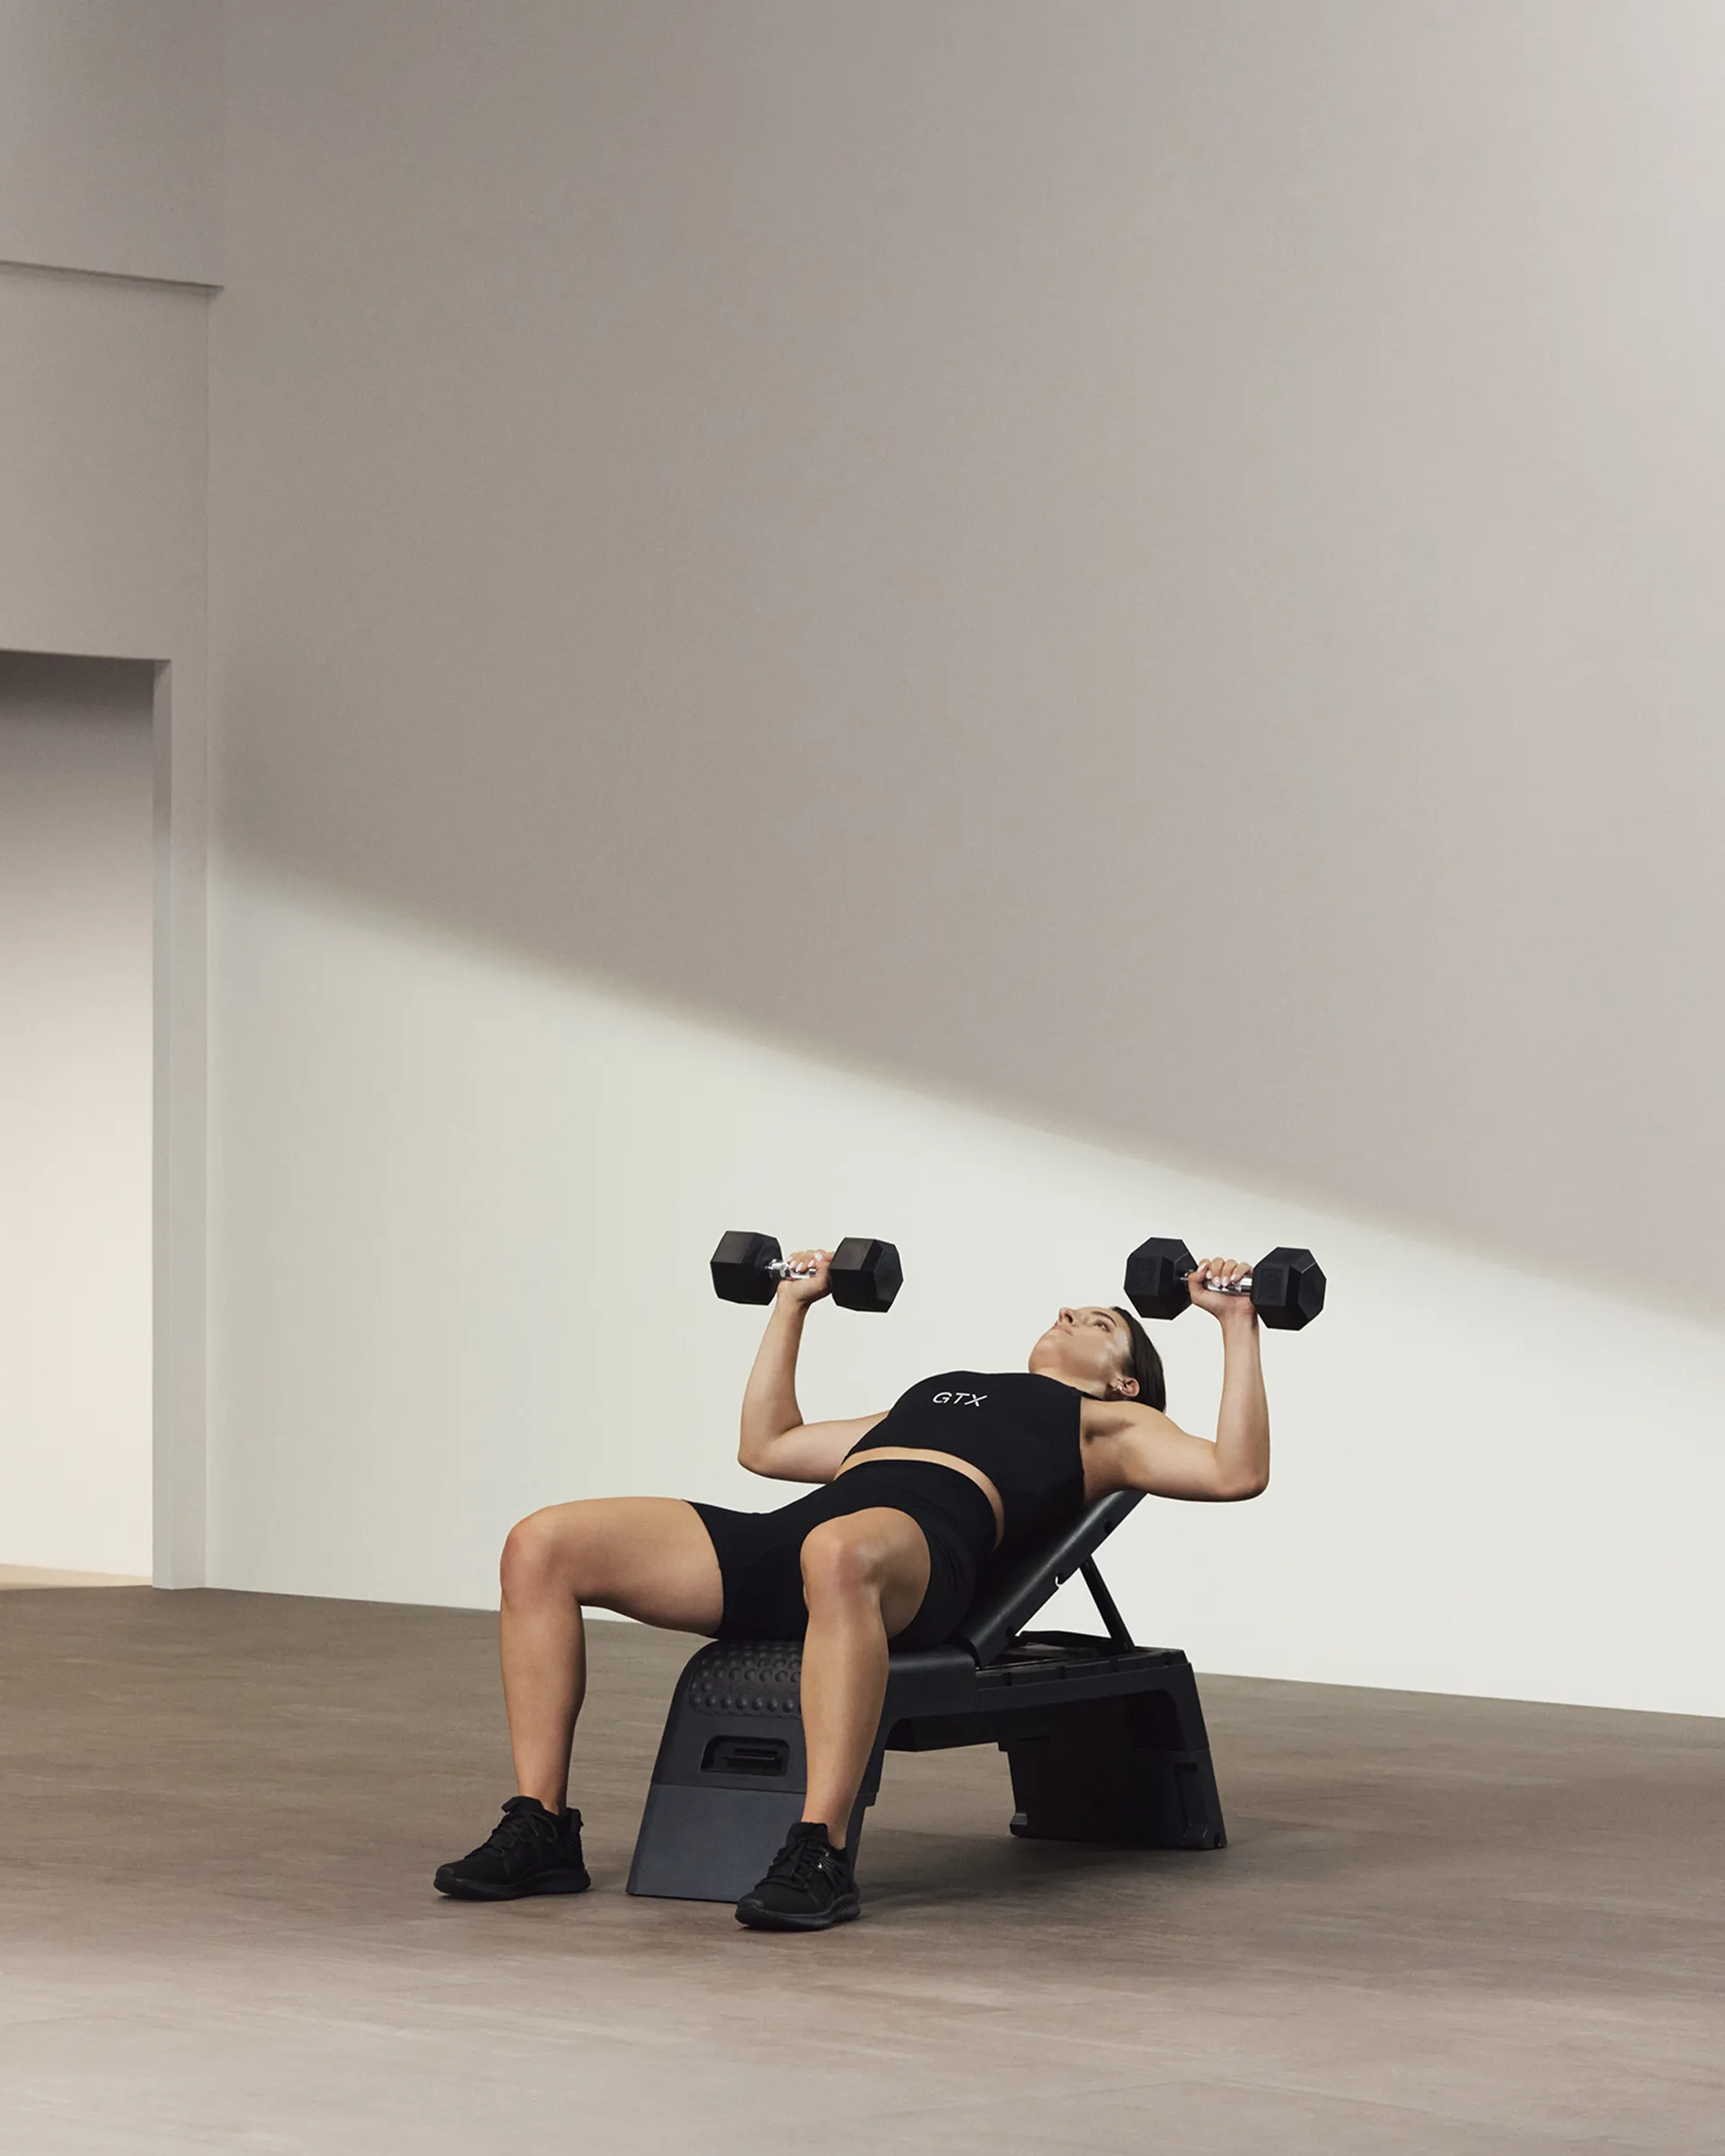 A Life Time member holding two dumbbells on an incline bench.